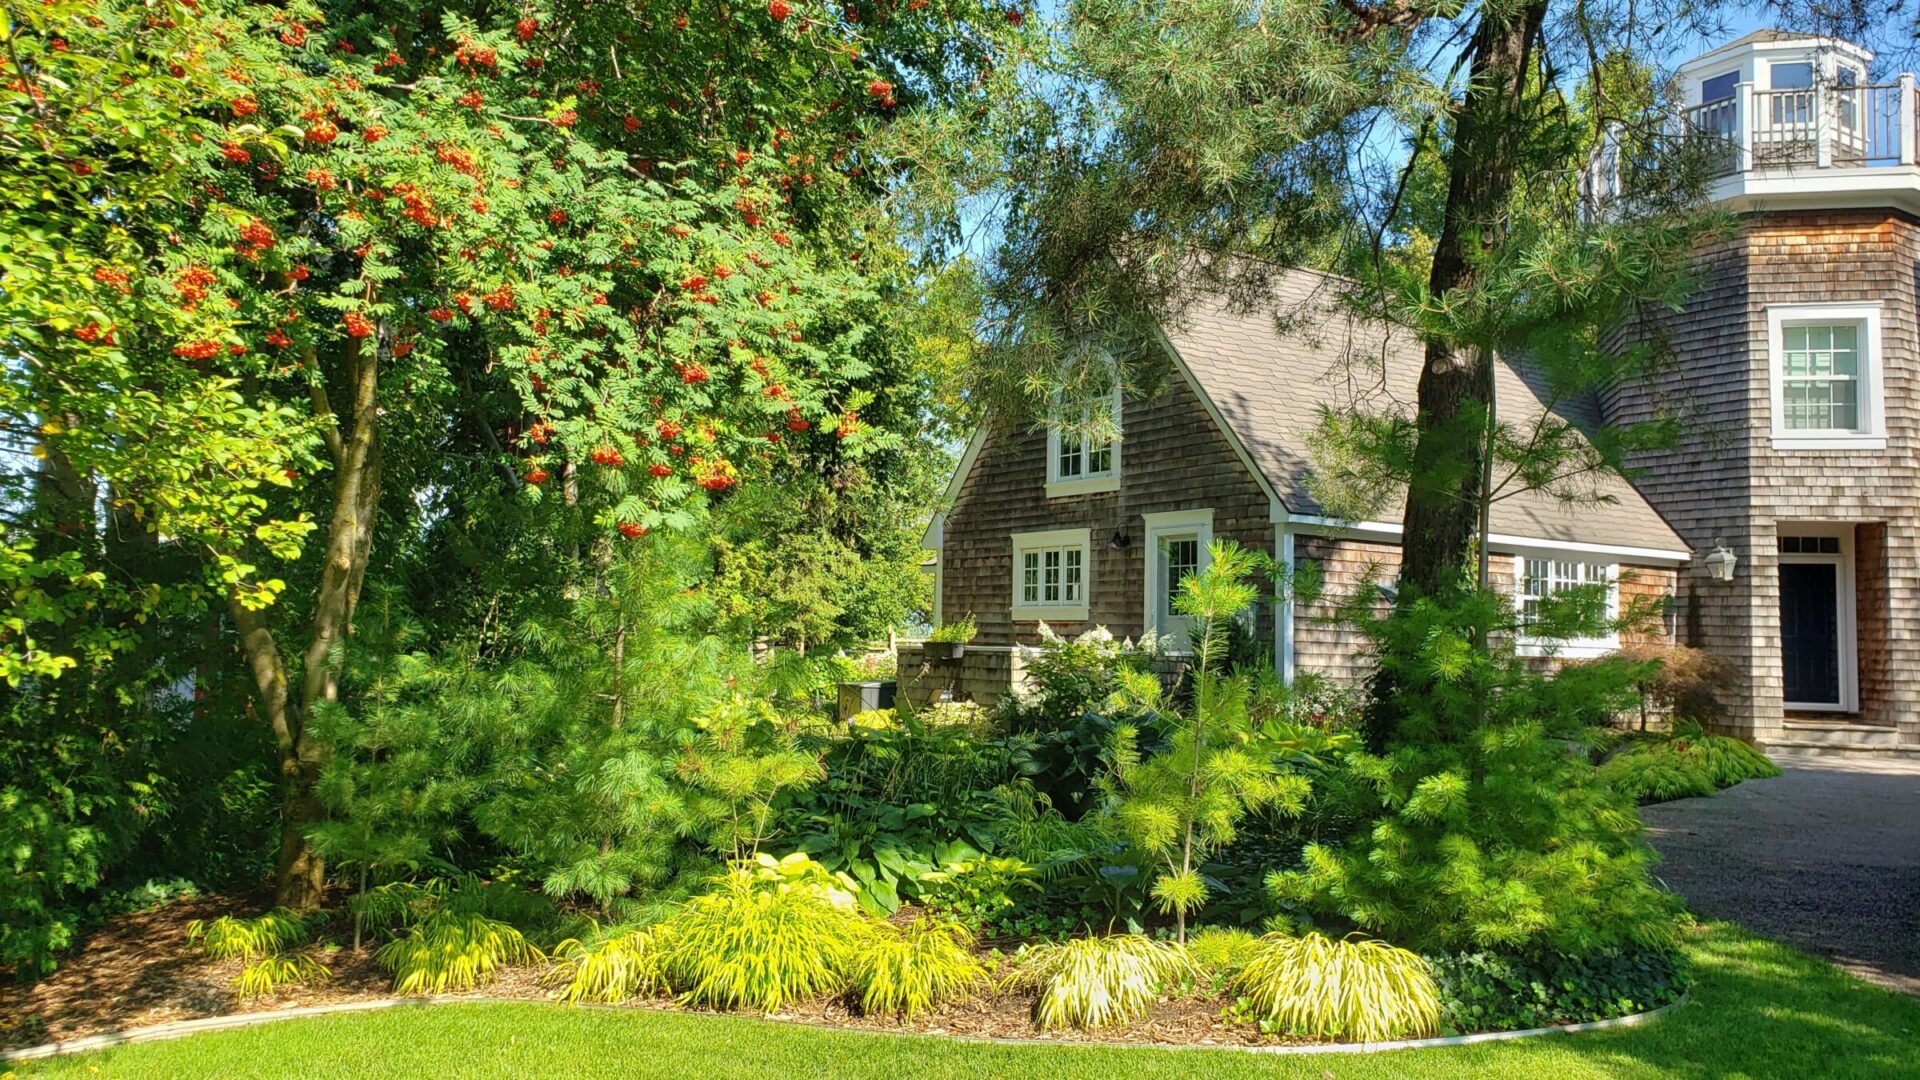 A quaint house with cedar shingle siding is surrounded by lush gardens, manicured grass, and a mature tree with red berries under a clear sky.